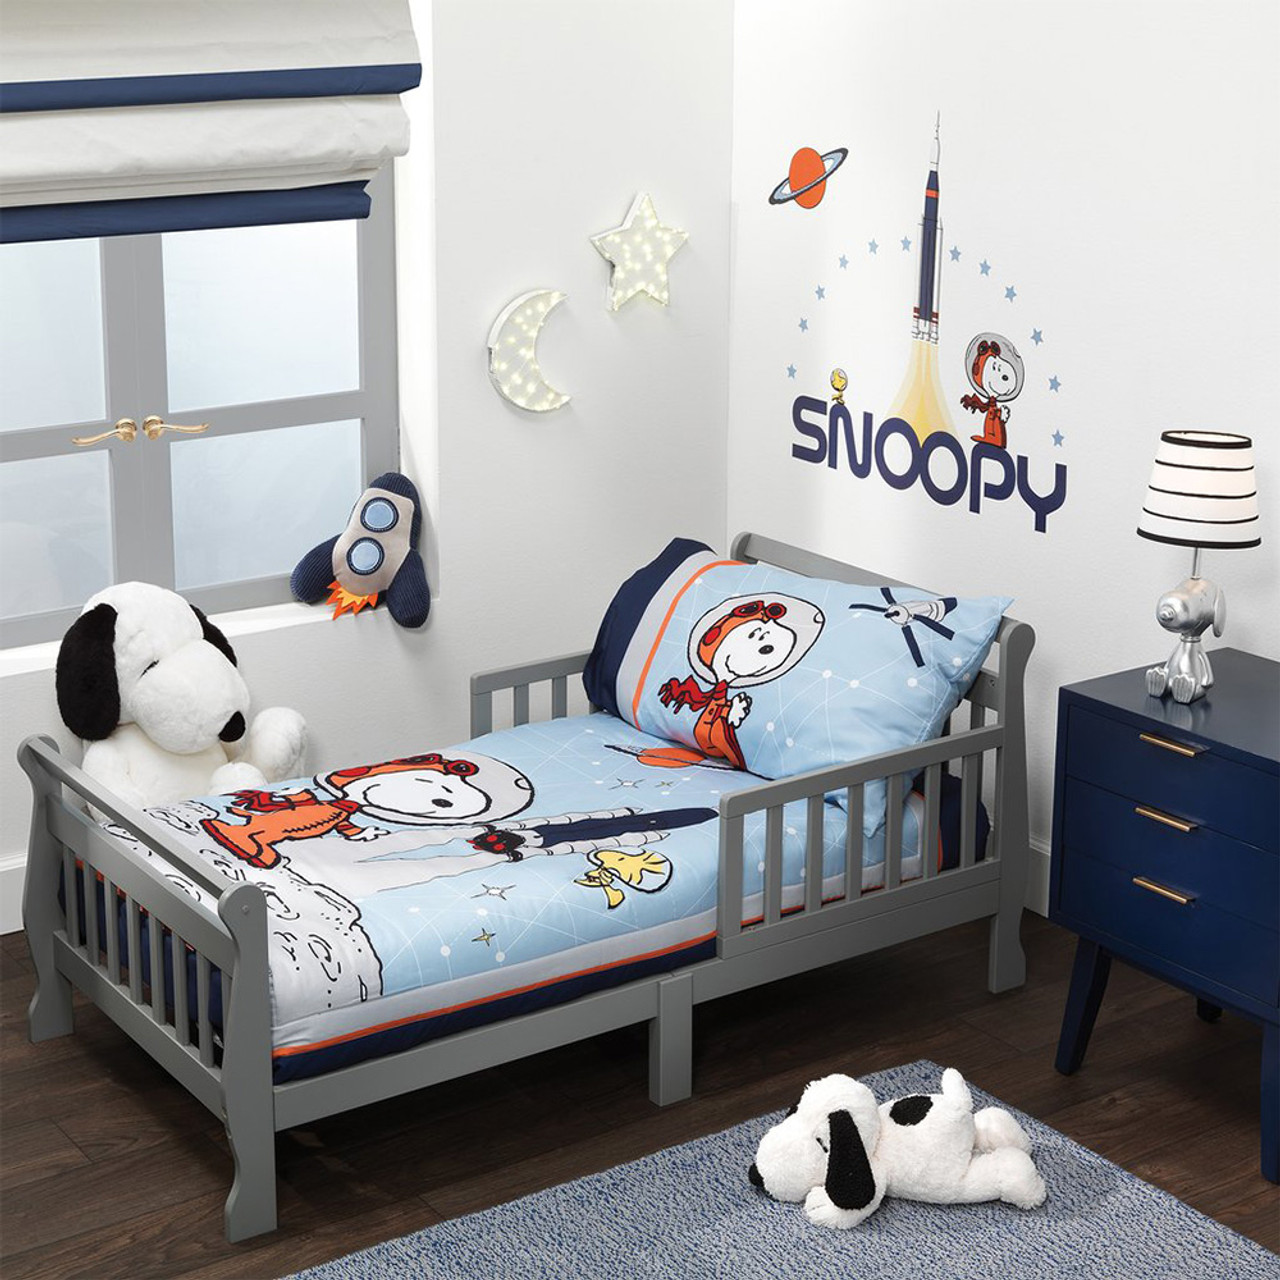 https://cdn11.bigcommerce.com/s-l97wqz3k9m/images/stencil/1280x1280/products/99355/195622/8-BedtimeOriginals-AstronautSnoopy-ToddlerSet-4PCToddlerSet_2560104V__06104.1634822949.jpg?c=1?imbypass=on